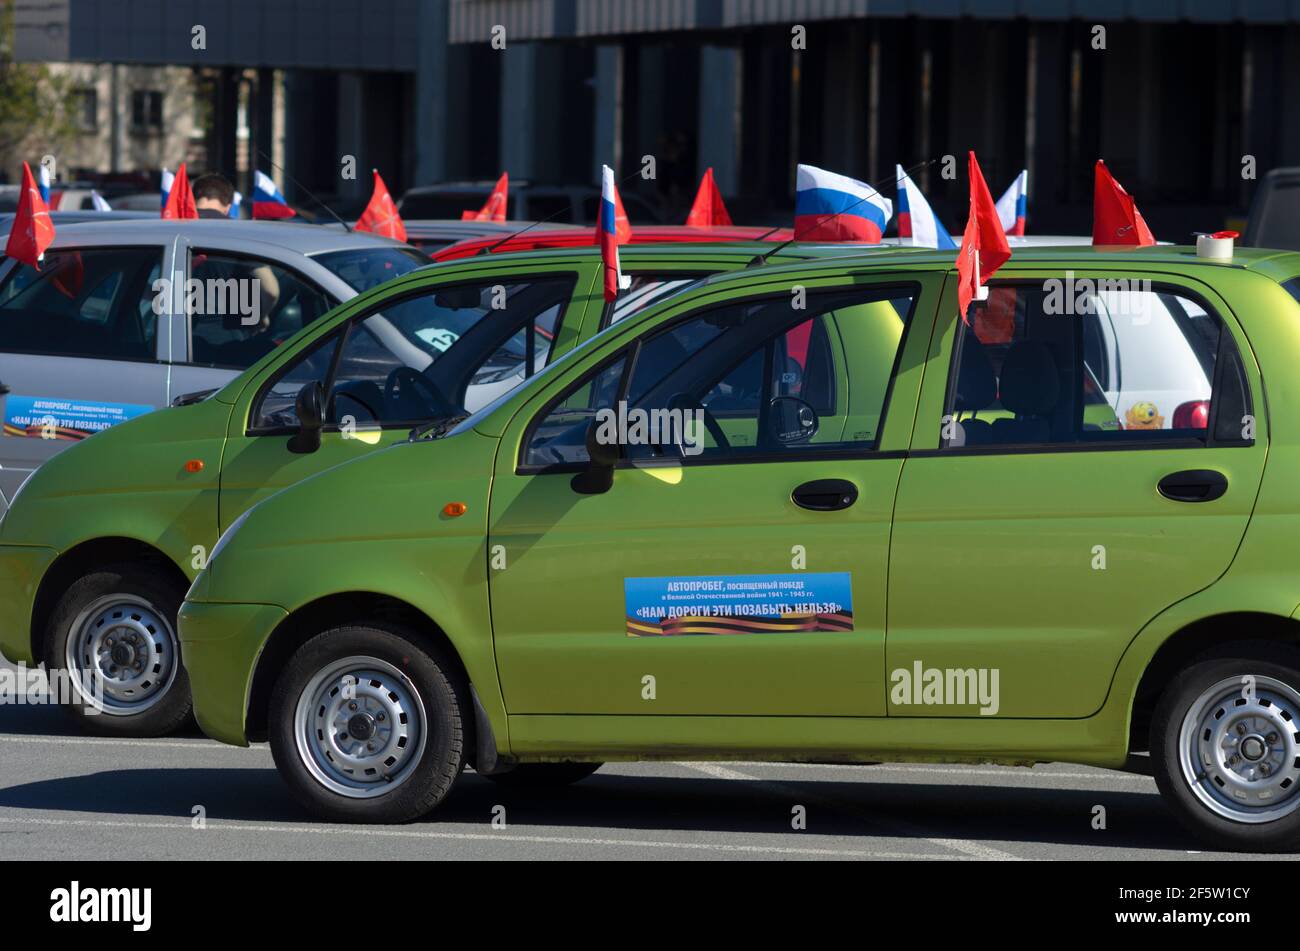 Saint Petersburg, Russia - May 05, 2016: Annual rally on flag-decorated small cars Daewoo Matiz in memory of the Great Patriotic War 1941-1945 Stock Photo